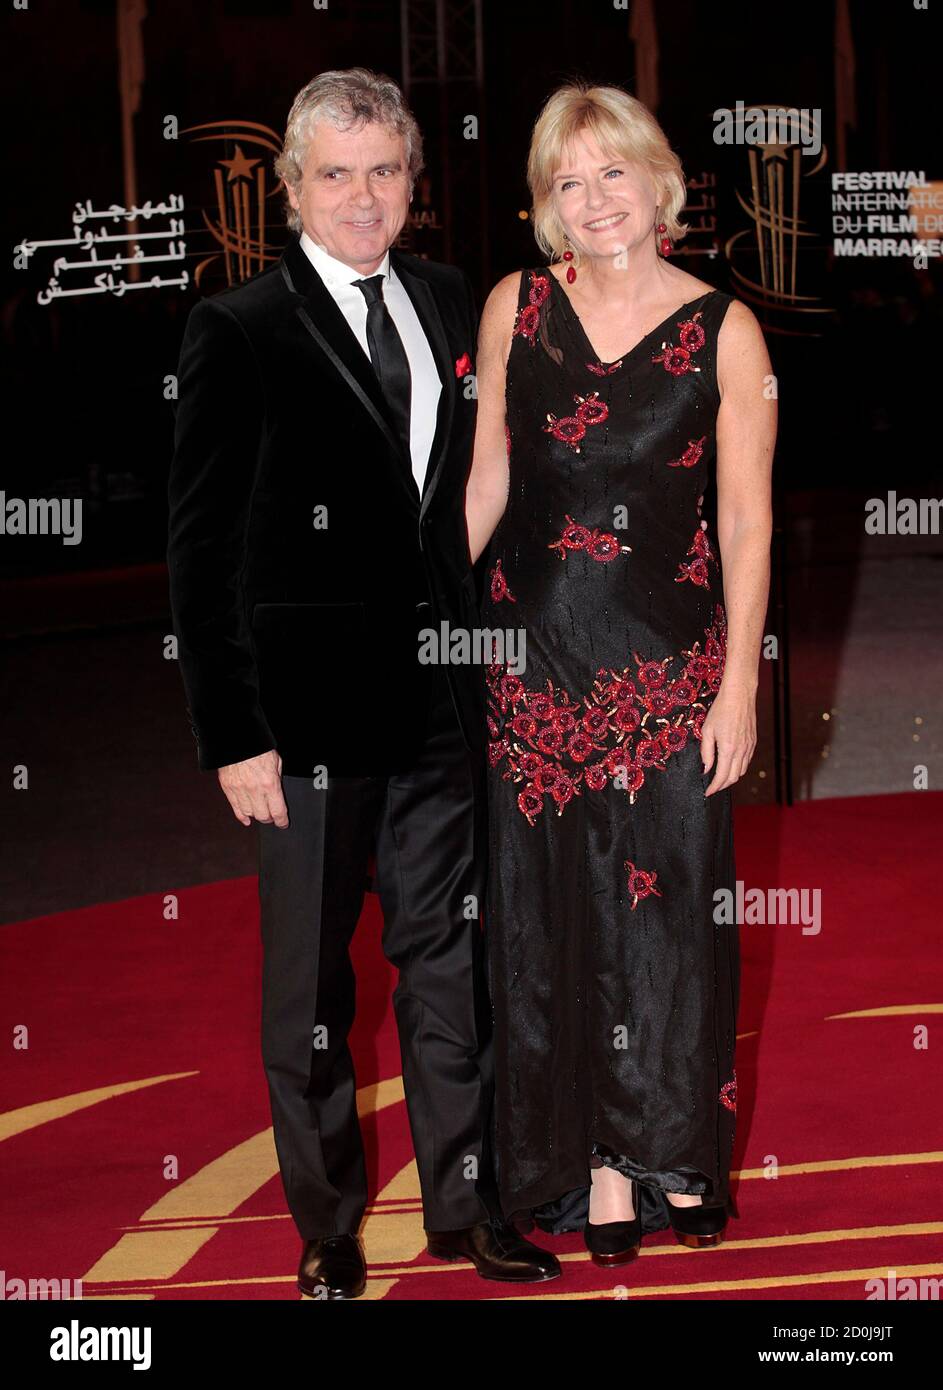 French television journalist Claude Serillon and his wife arrive at the  11th International Marrakech Film Festival (FIFM), December 8, 2011.  REUTERS/Jean Blondin (MOROCCO - Tags: ENTERTAINMENT MEDIA Stock Photo -  Alamy